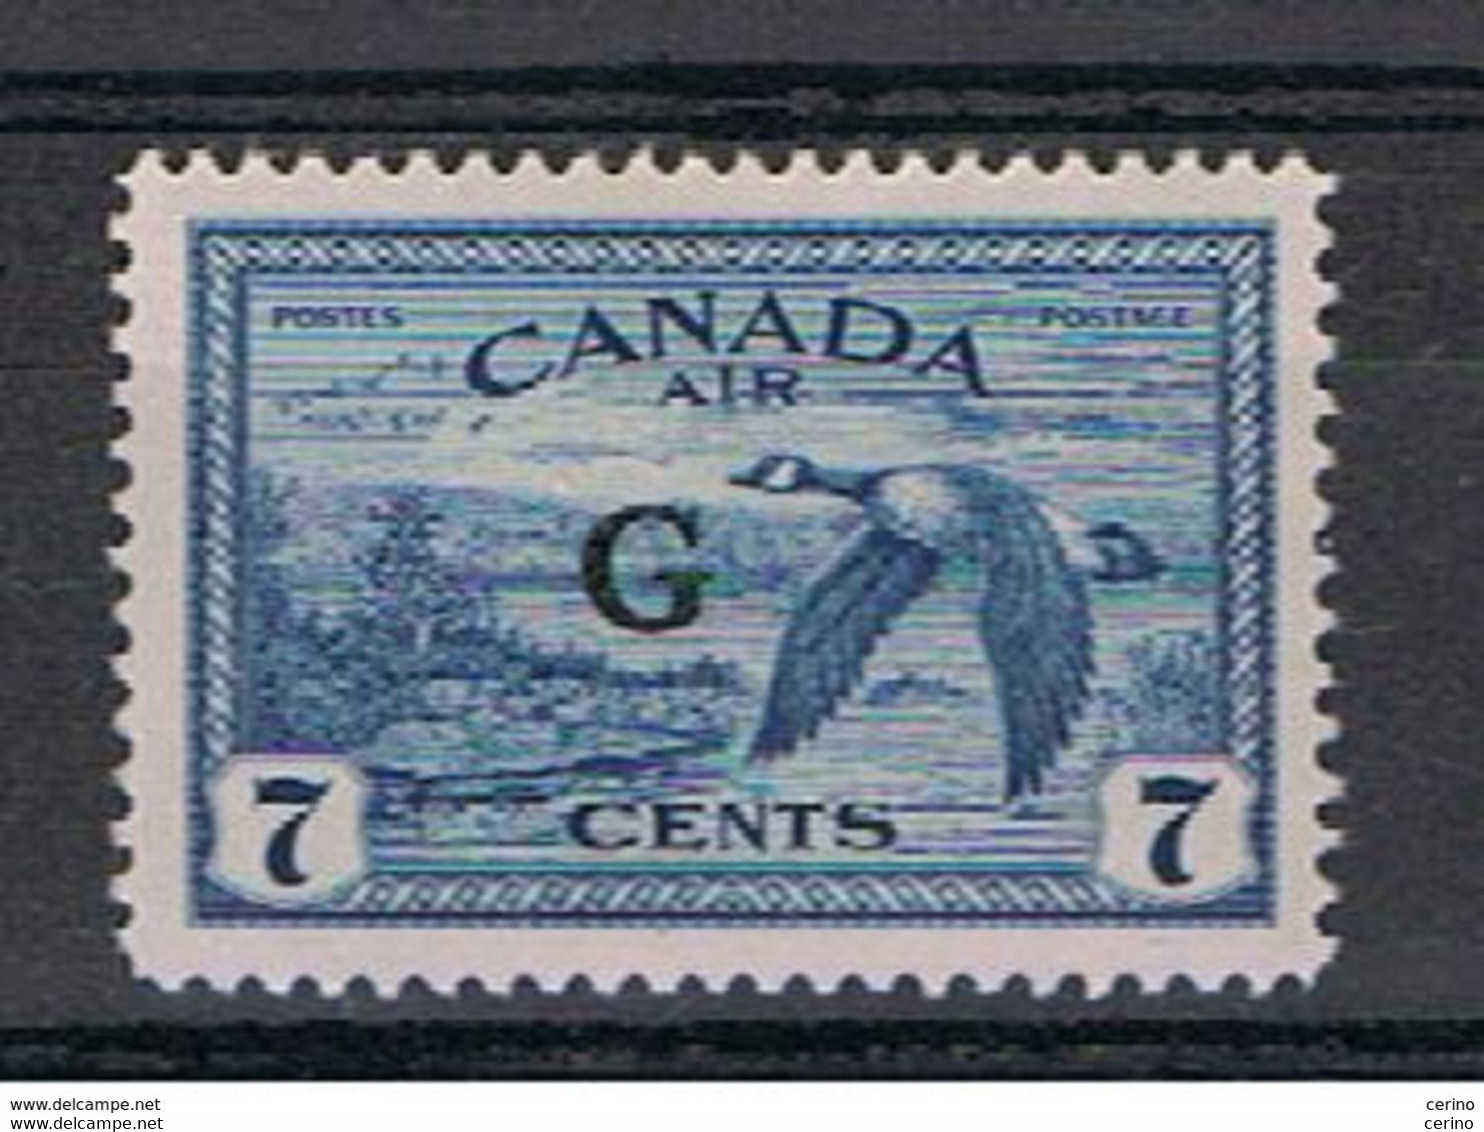 CANADA:  1950/52  OFFICIALS  OVERPRINT  -  7 C. UNUSED  STAMP  -  YV/TELL. 28 - Surchargés